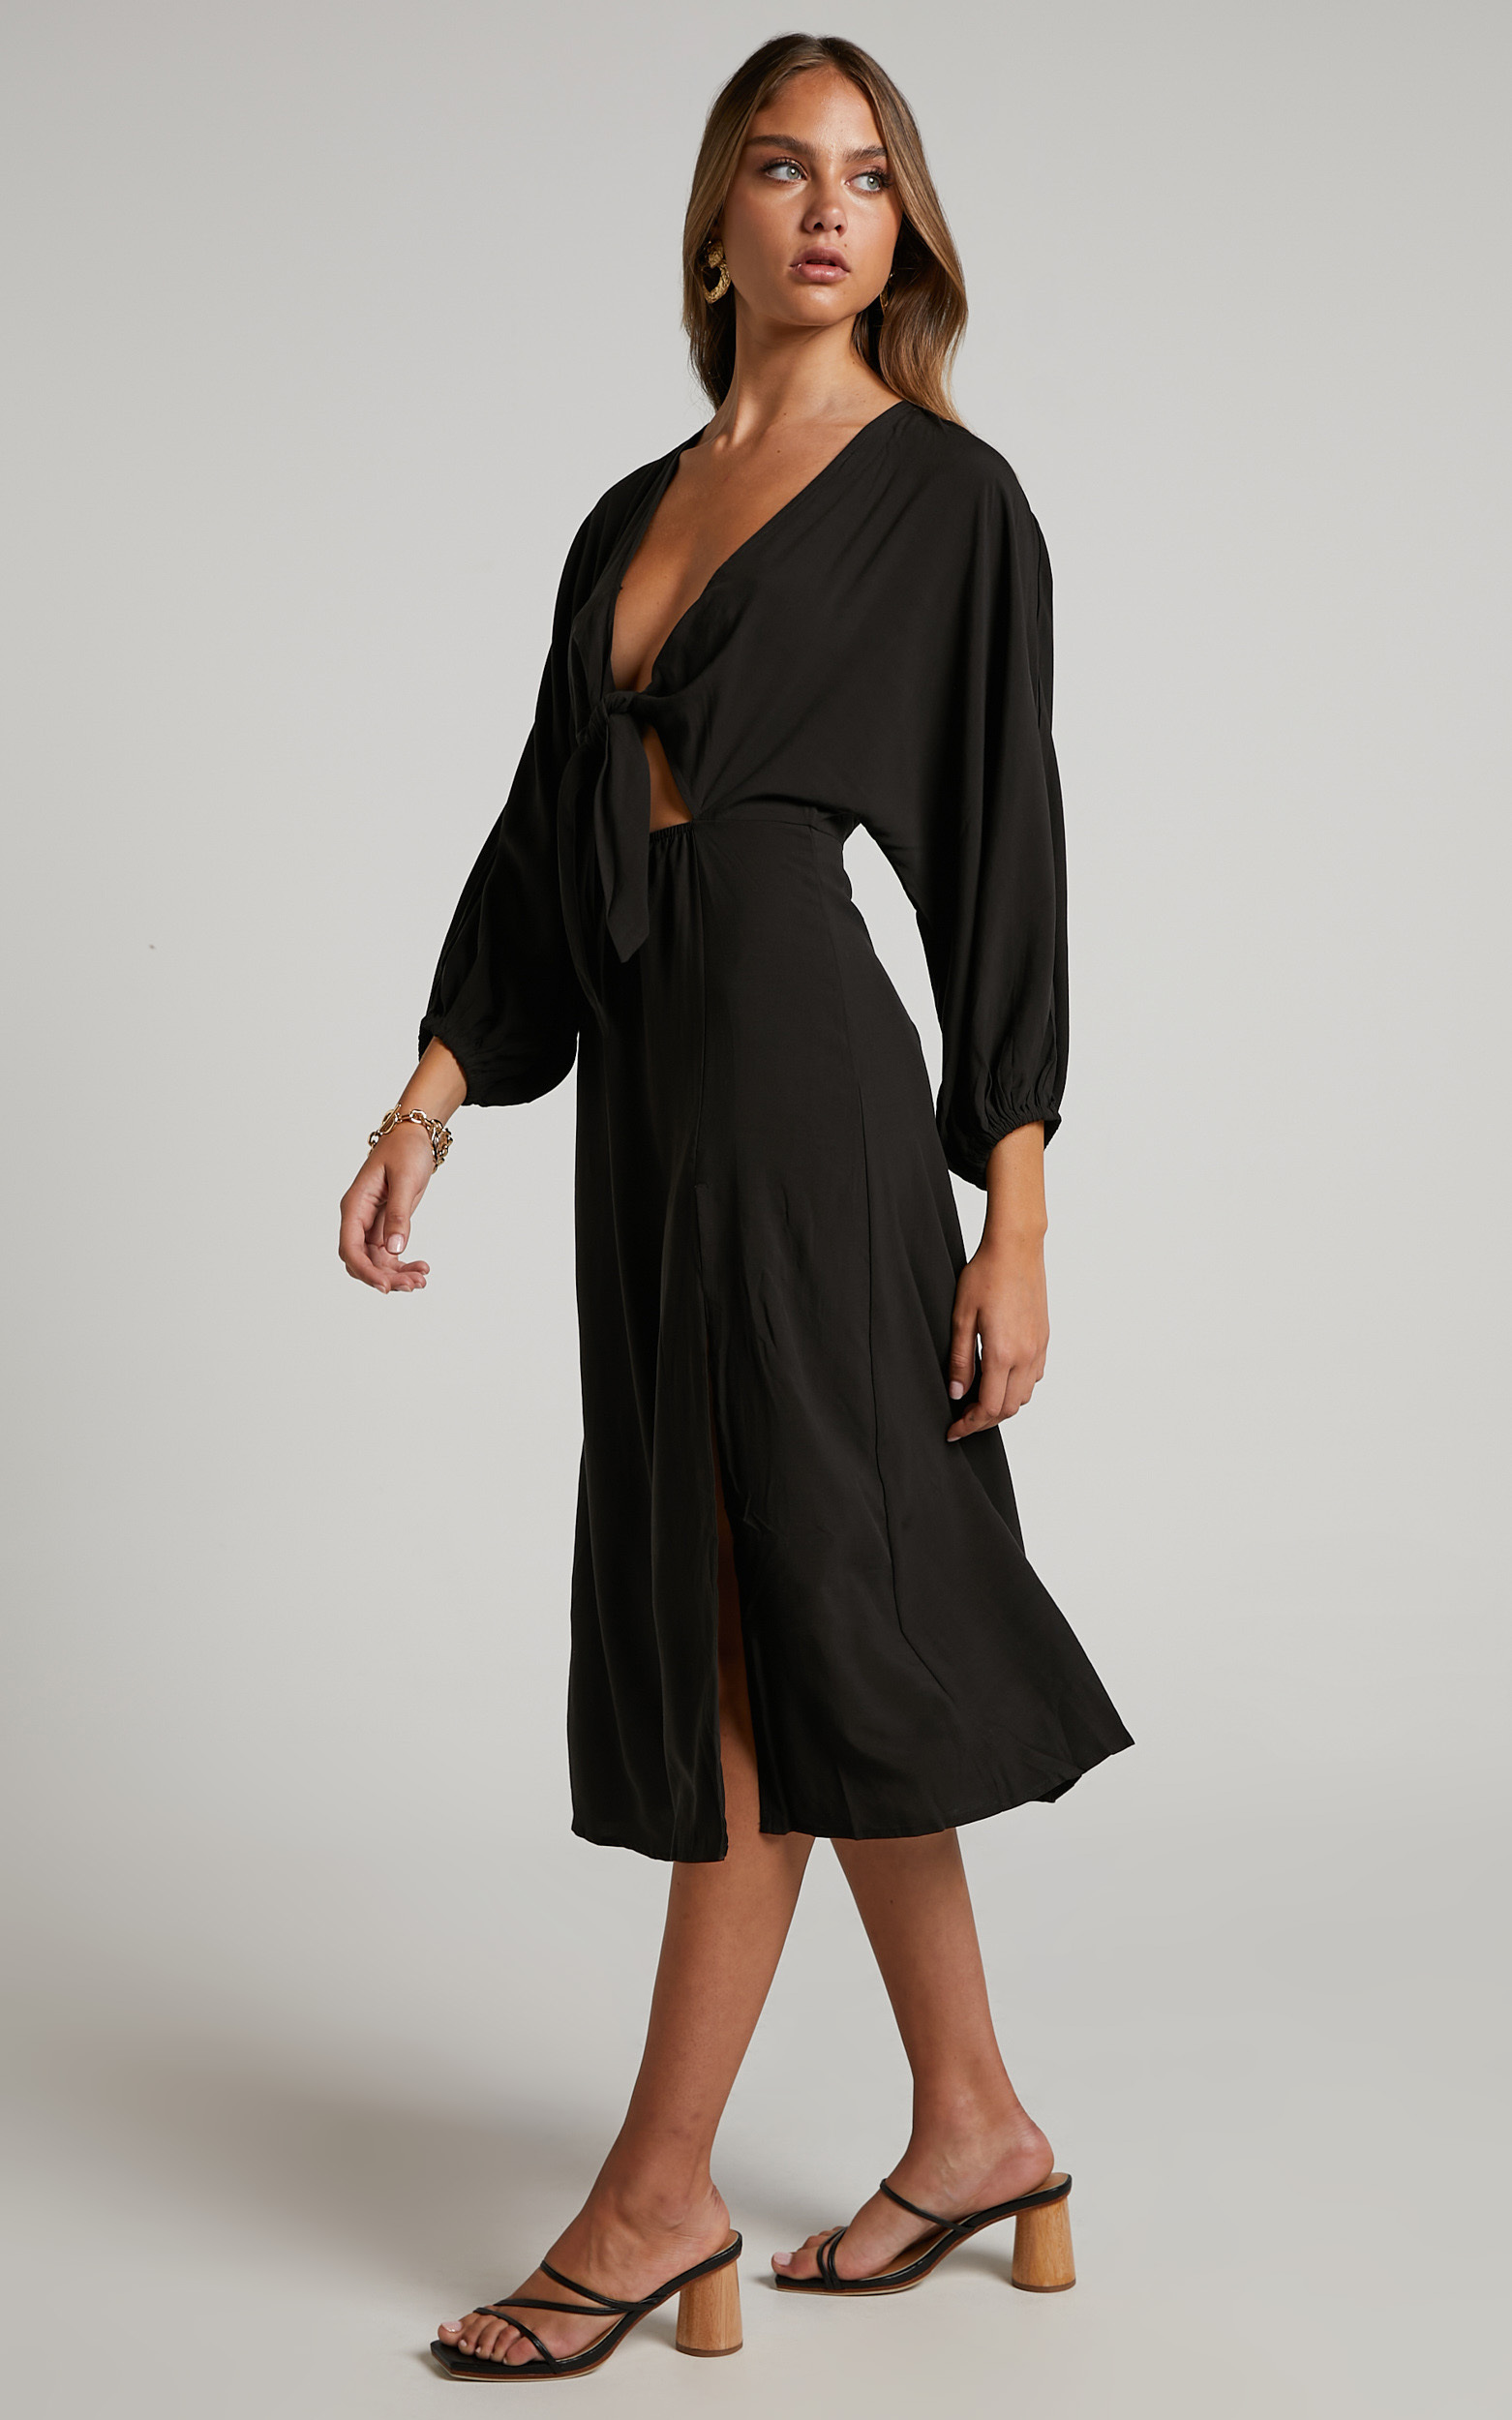 Tyricia Long Sleeve Tie Front Cut Out Midi Dress in Black Showpo USA